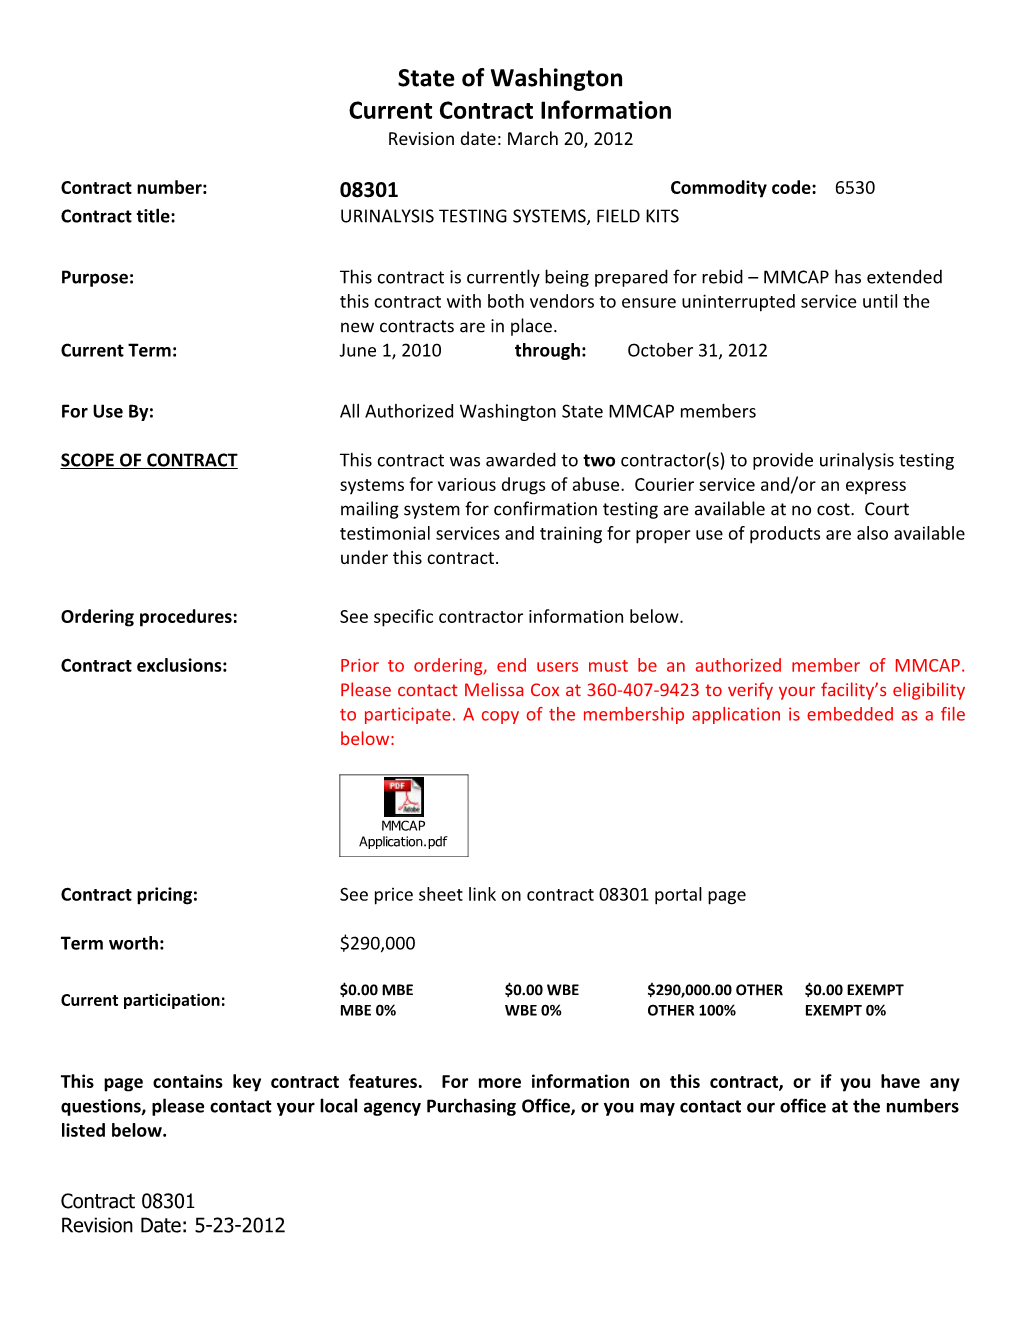 Current Contract Information Form s25